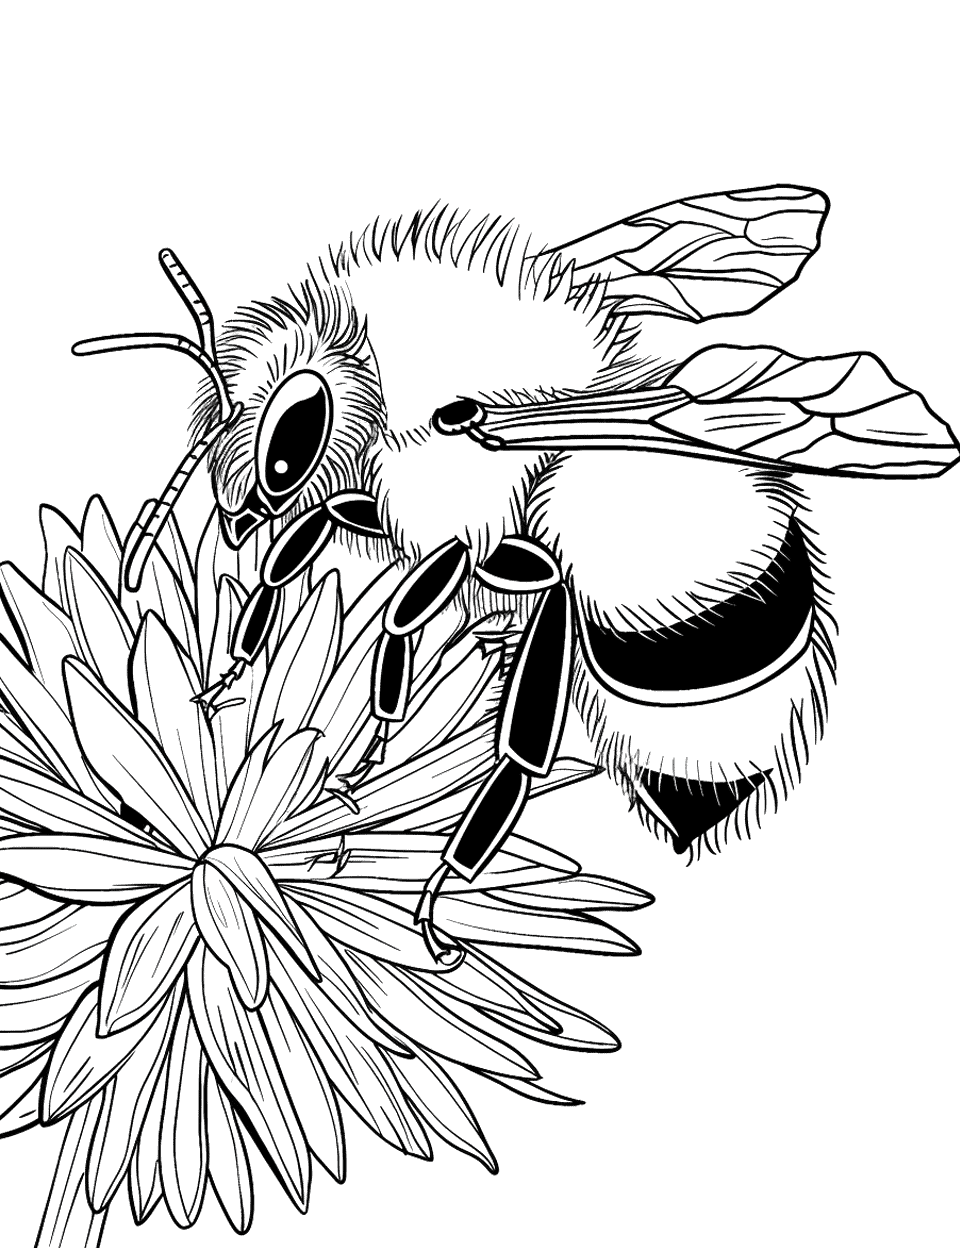 Bee on a Flower Coloring Page - A bee on a fluffy dandelion, ready for honey collection.